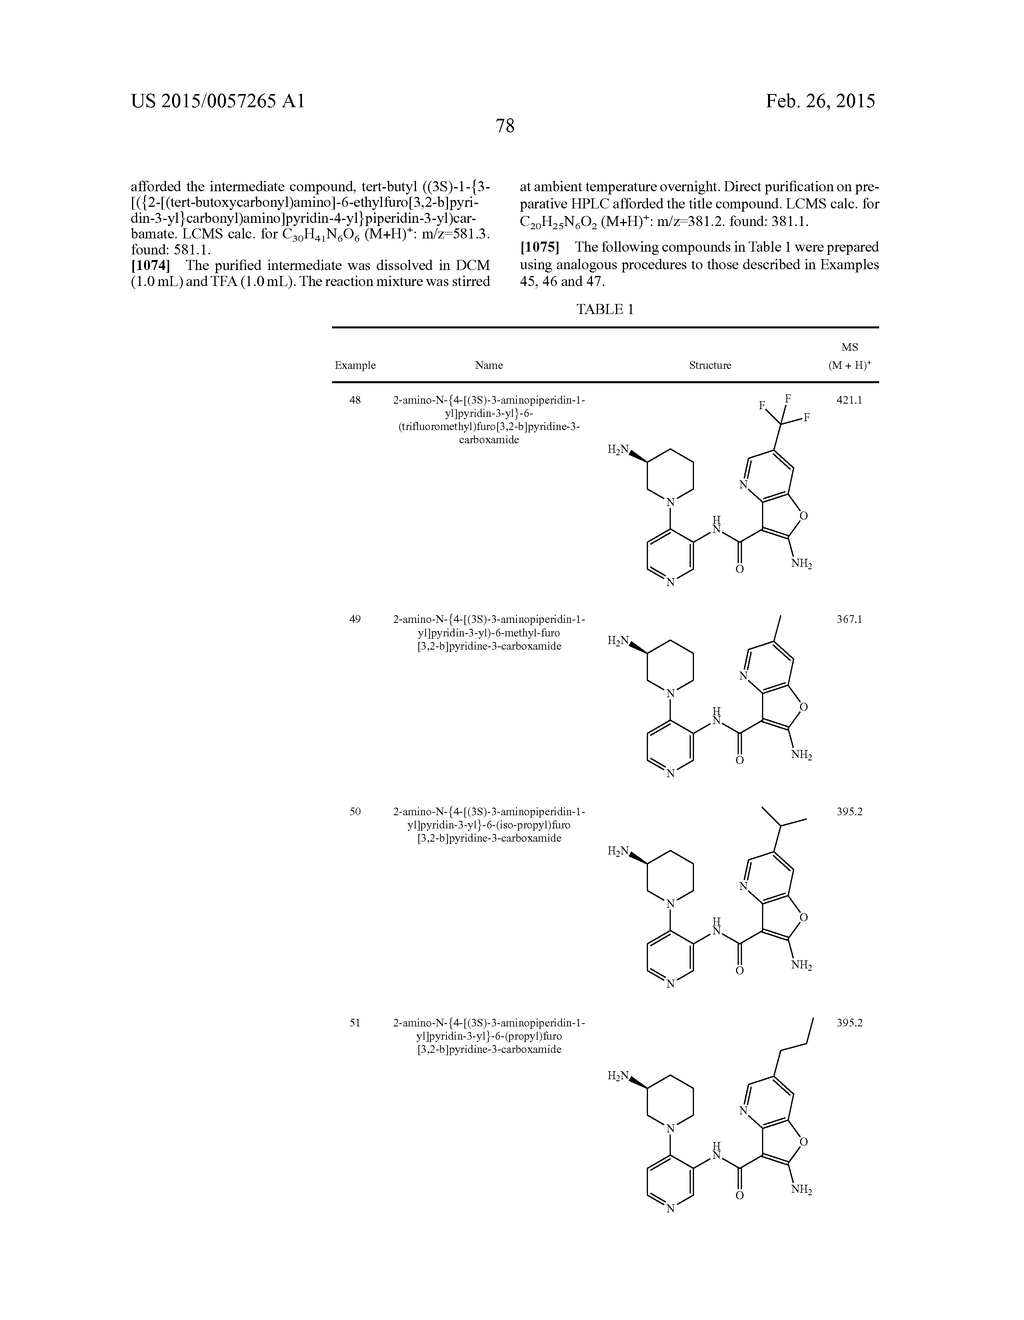 FURO- AND THIENO-PYRIDINE CARBOXAMIDE COMPOUNDS USEFUL AS PIM KINASE     INHIBITORS - diagram, schematic, and image 79